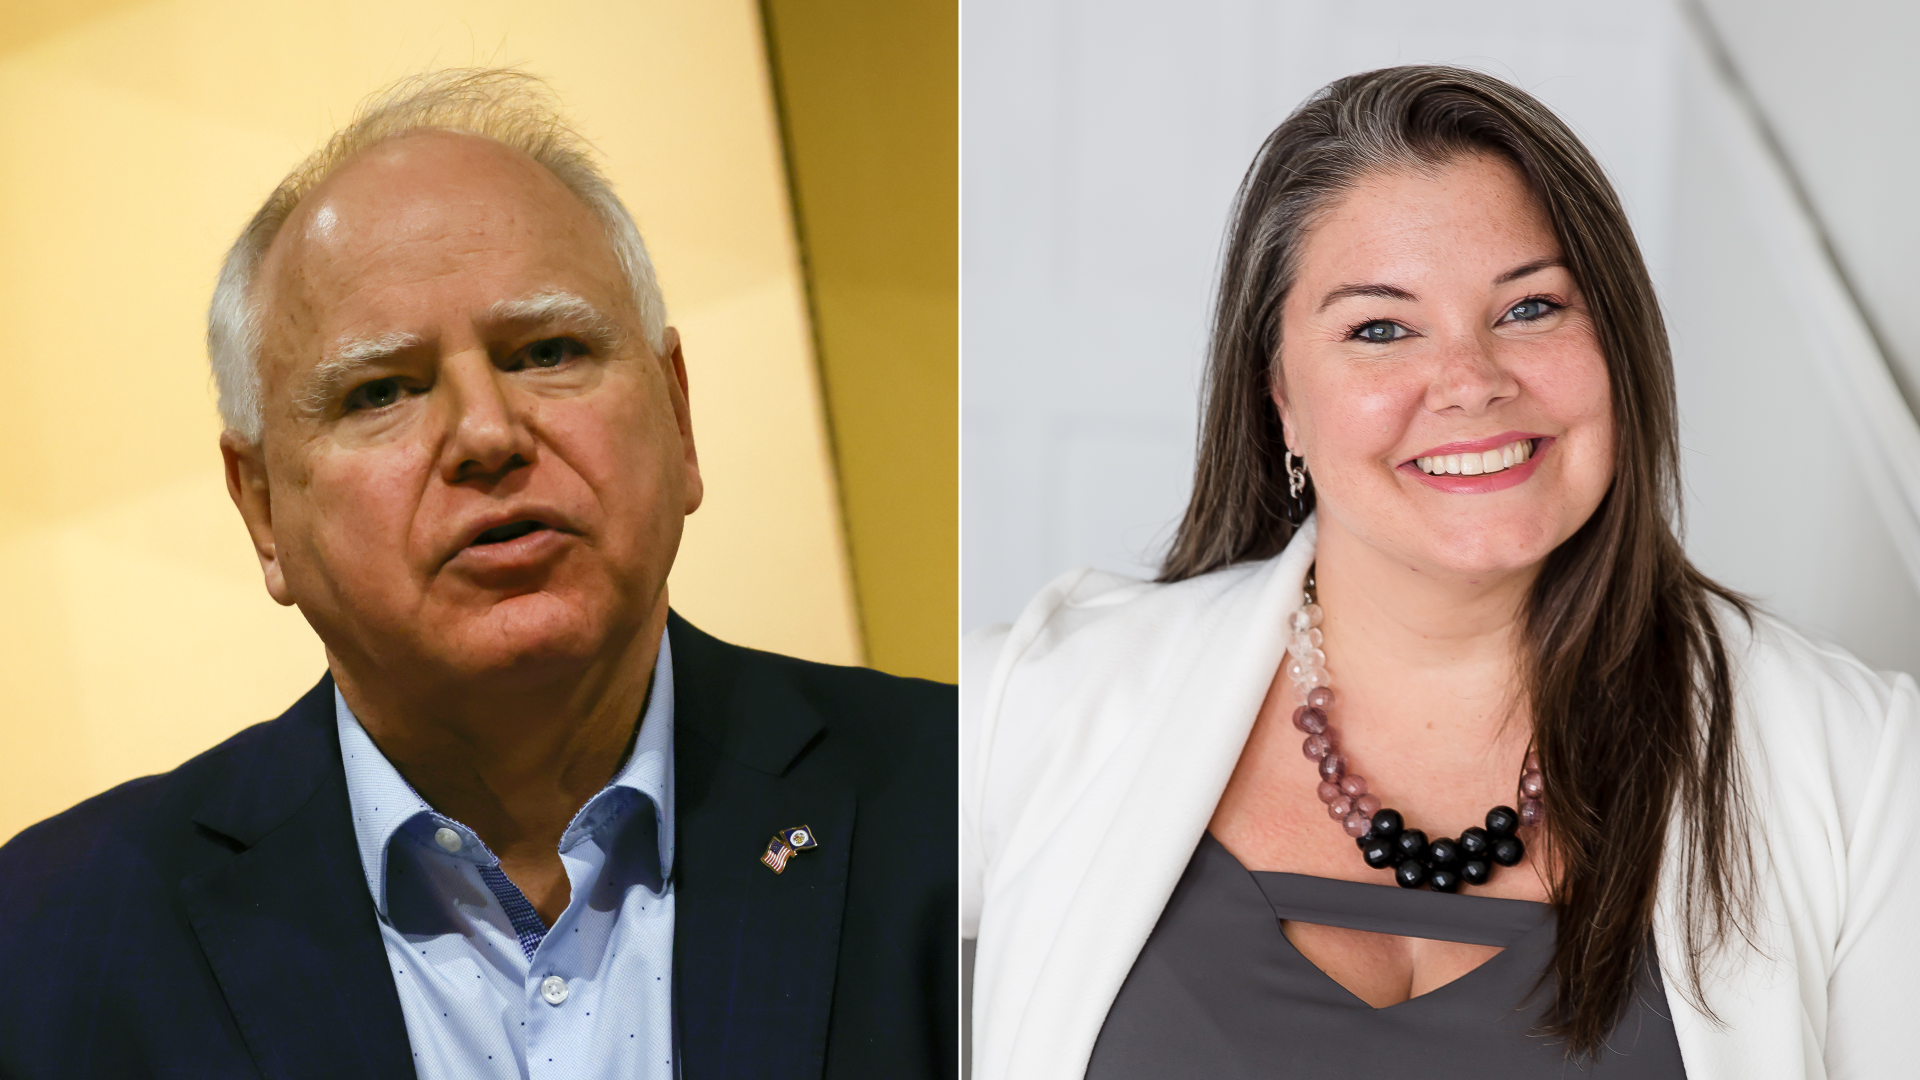 Gov Tim Walz and Erin Dupree in separate head shots